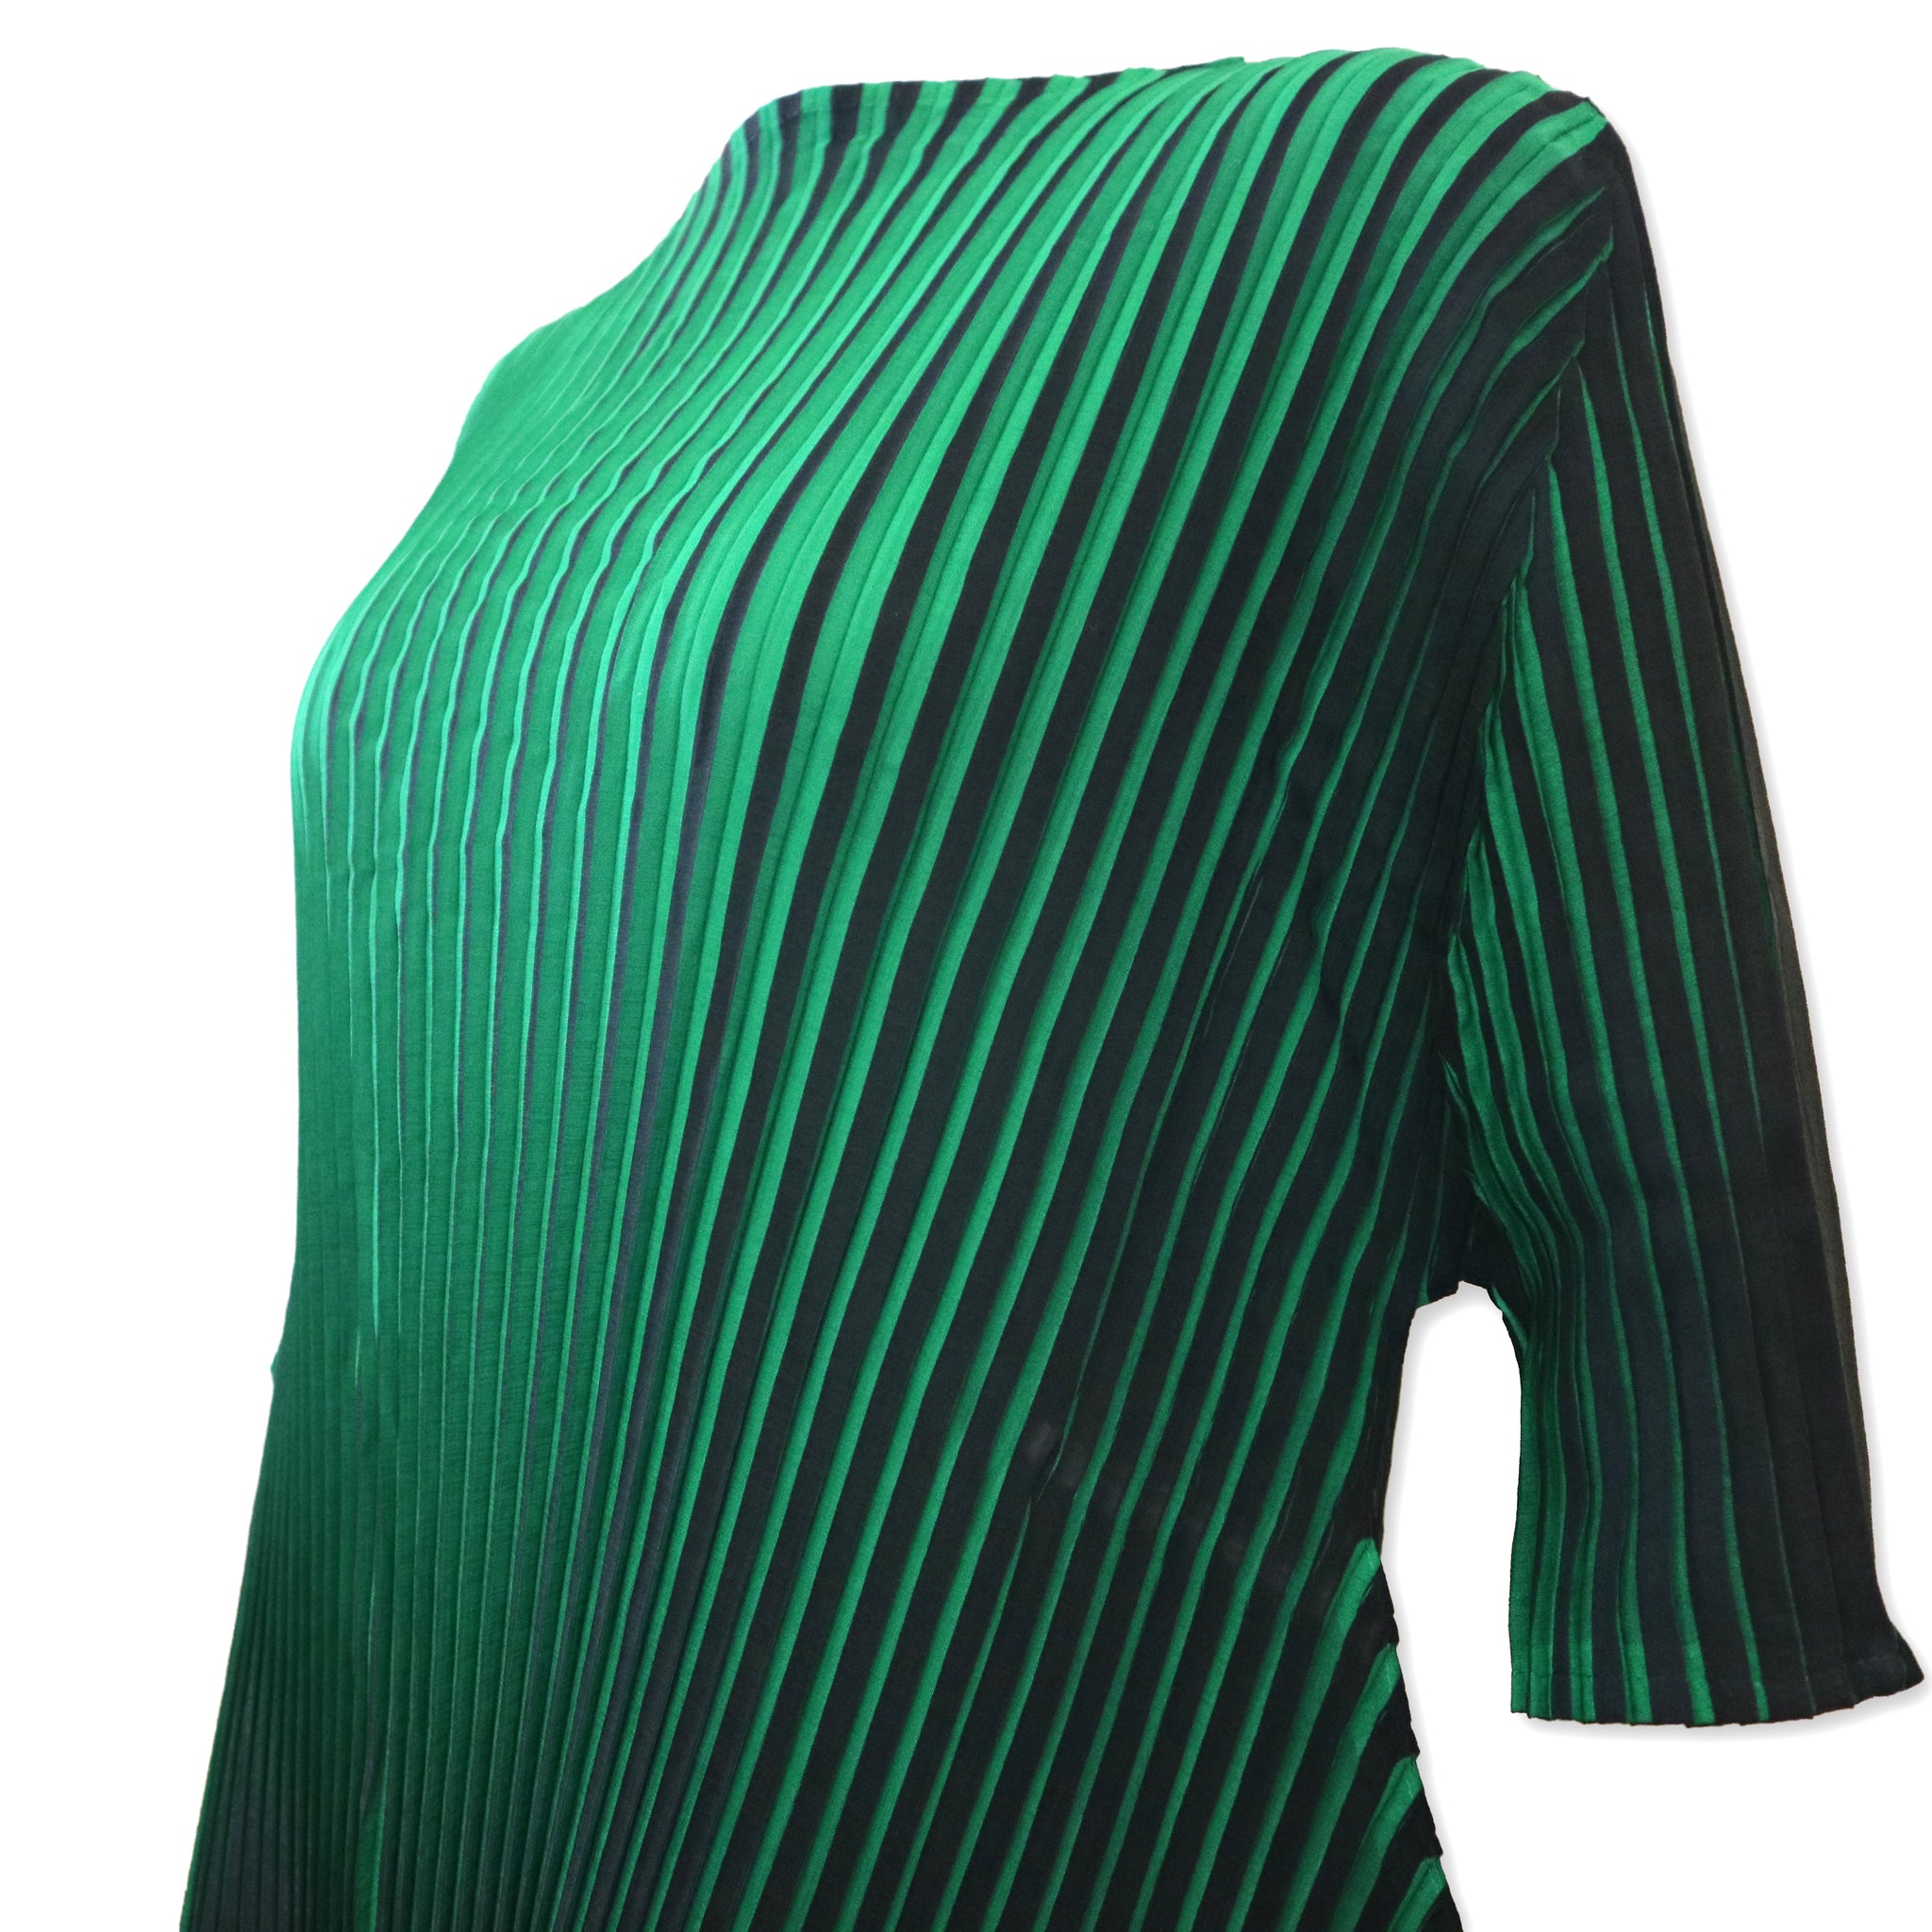 Accordion style pleated dress